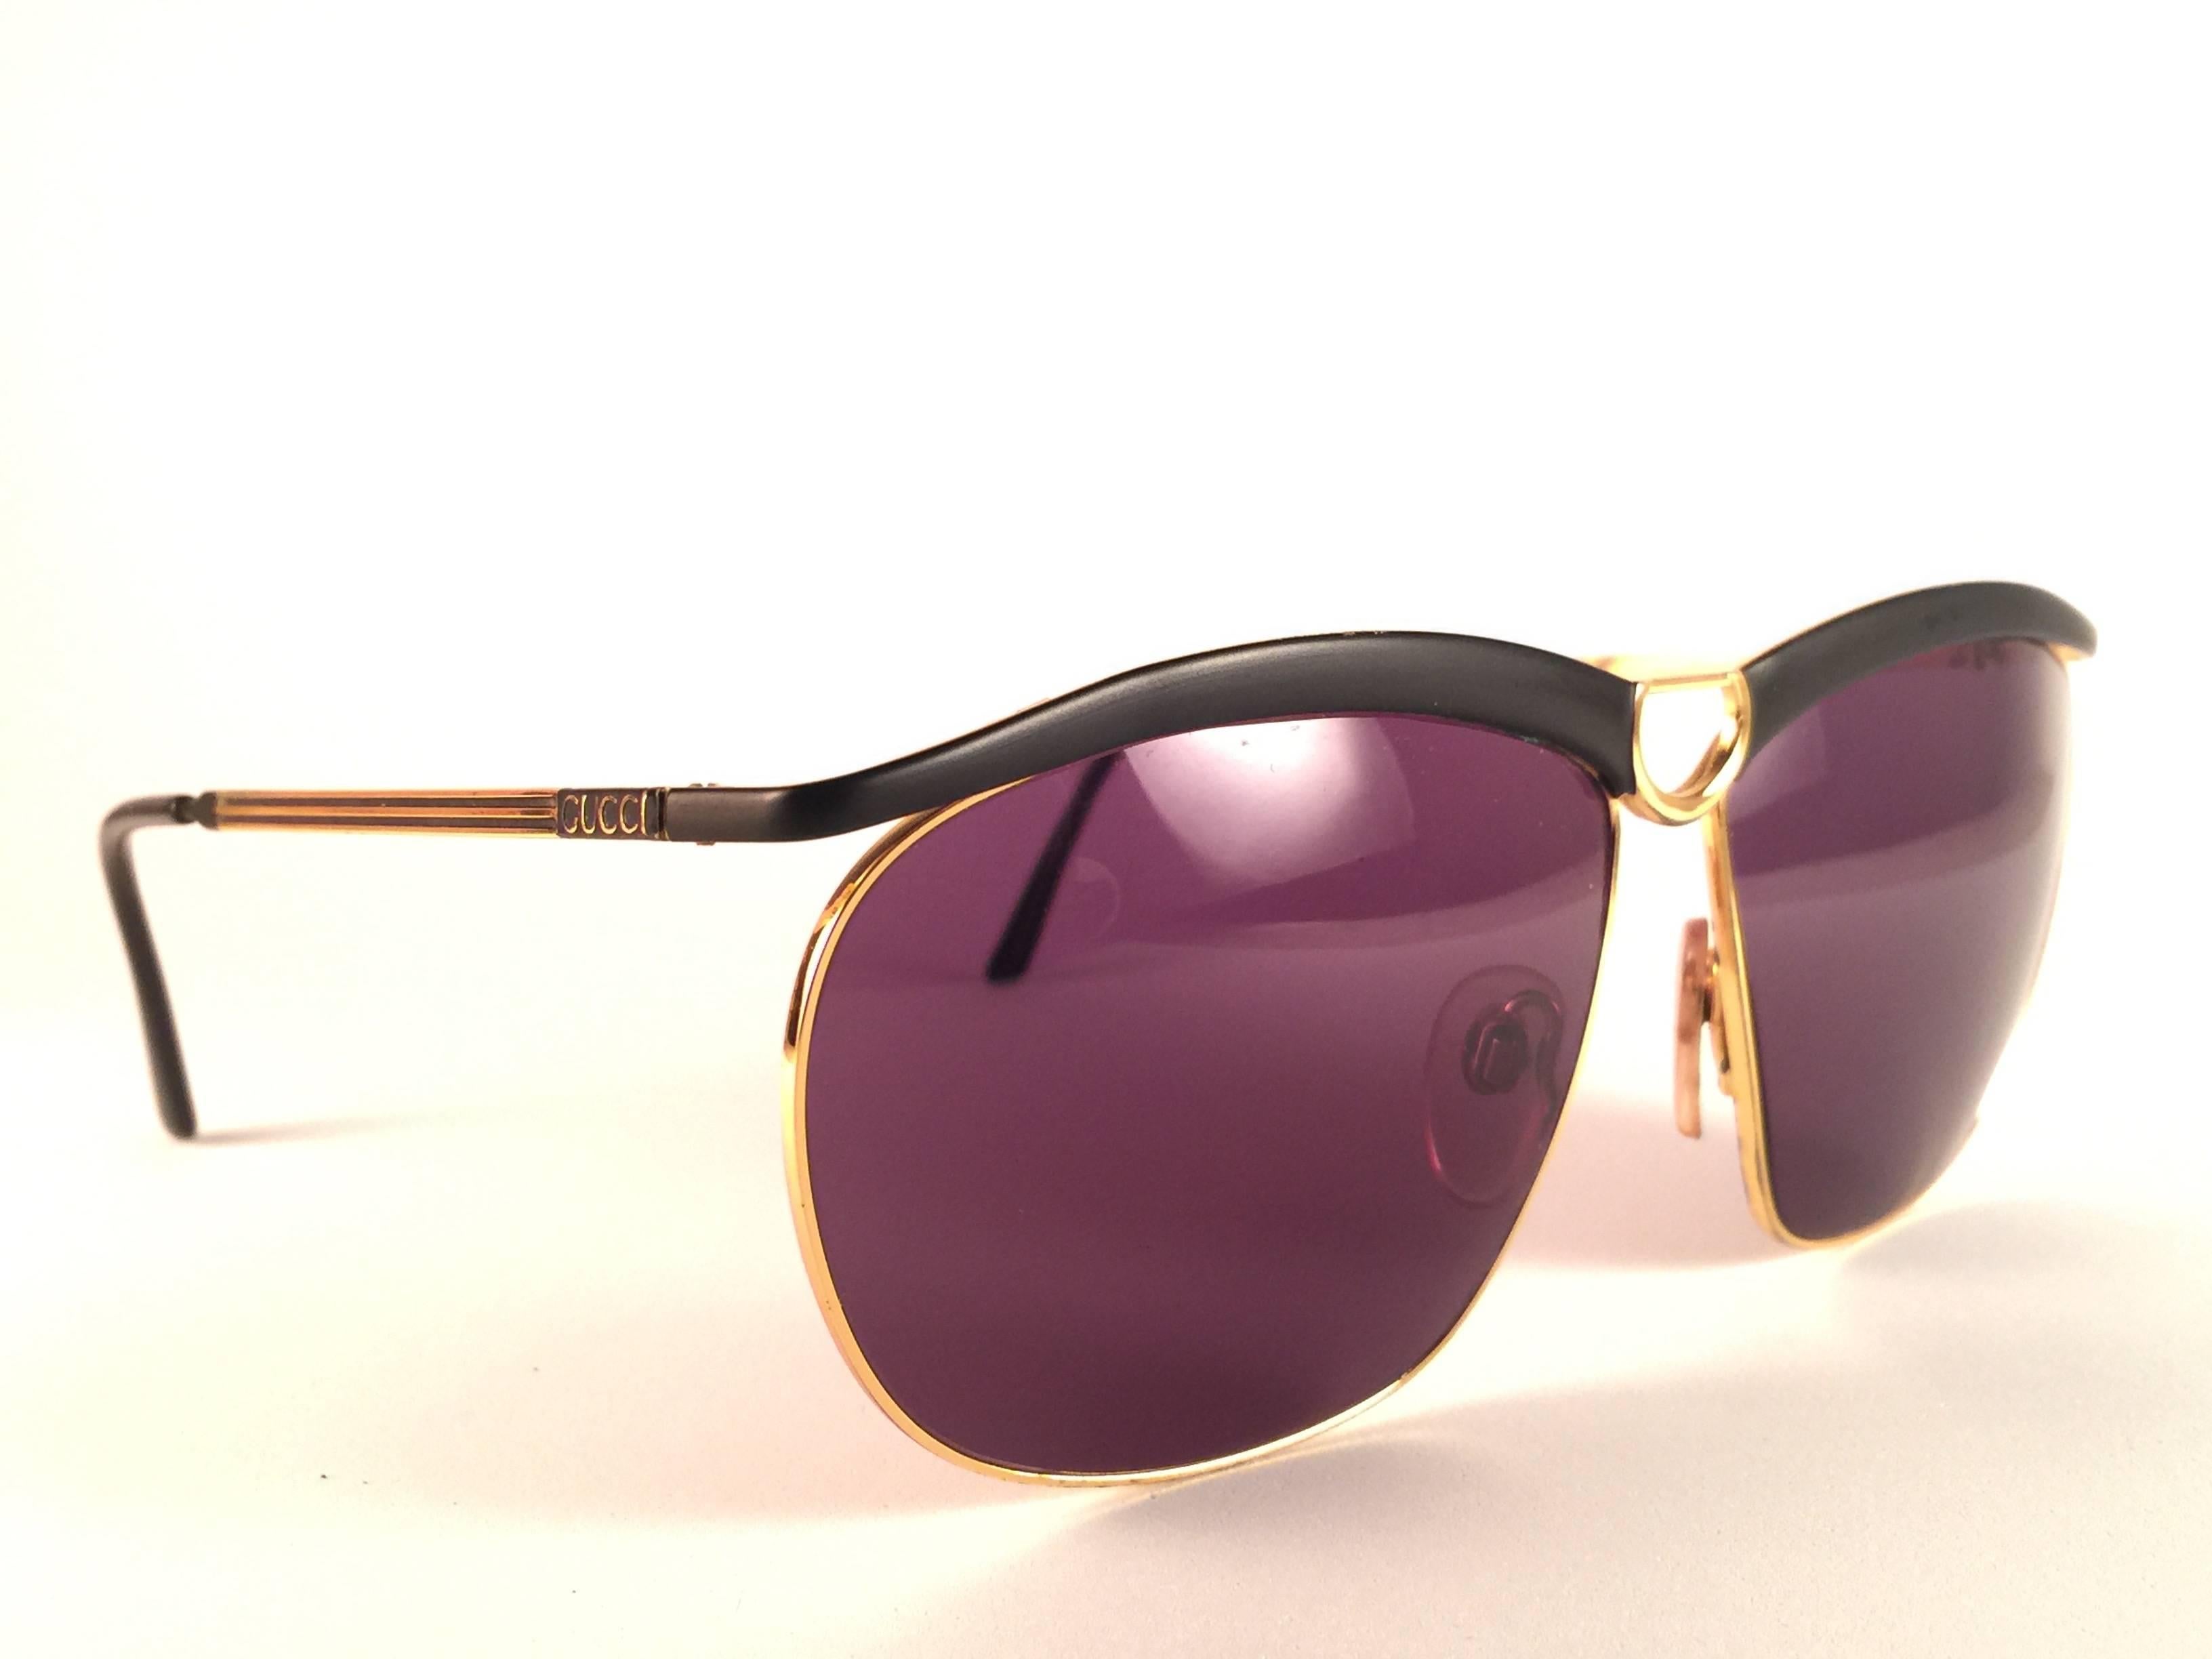 New Vintage Gucci Sunglasses in sleek black with gold details frame. Spotless purple lenses.  
New never worn or displayed. This item could show minor sign of wear due to nearly 30 years of storage. Made in Italy.
